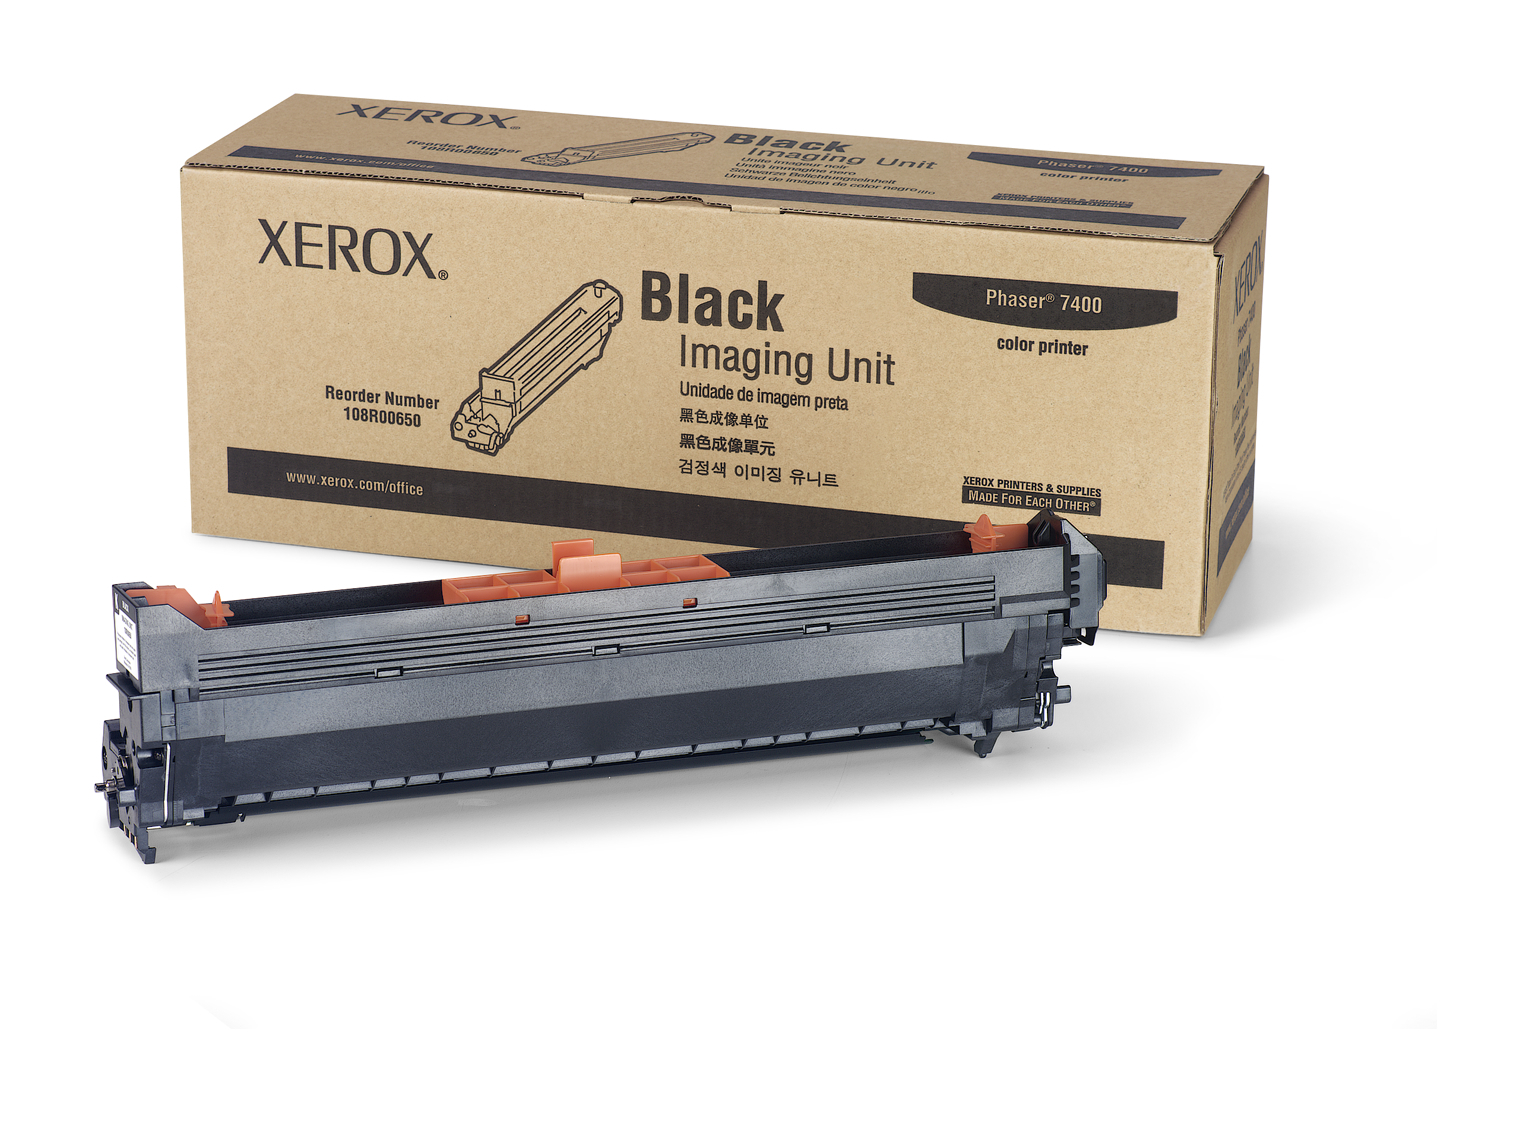 Xerox Black Imaging Drum (30,000 Pages*)